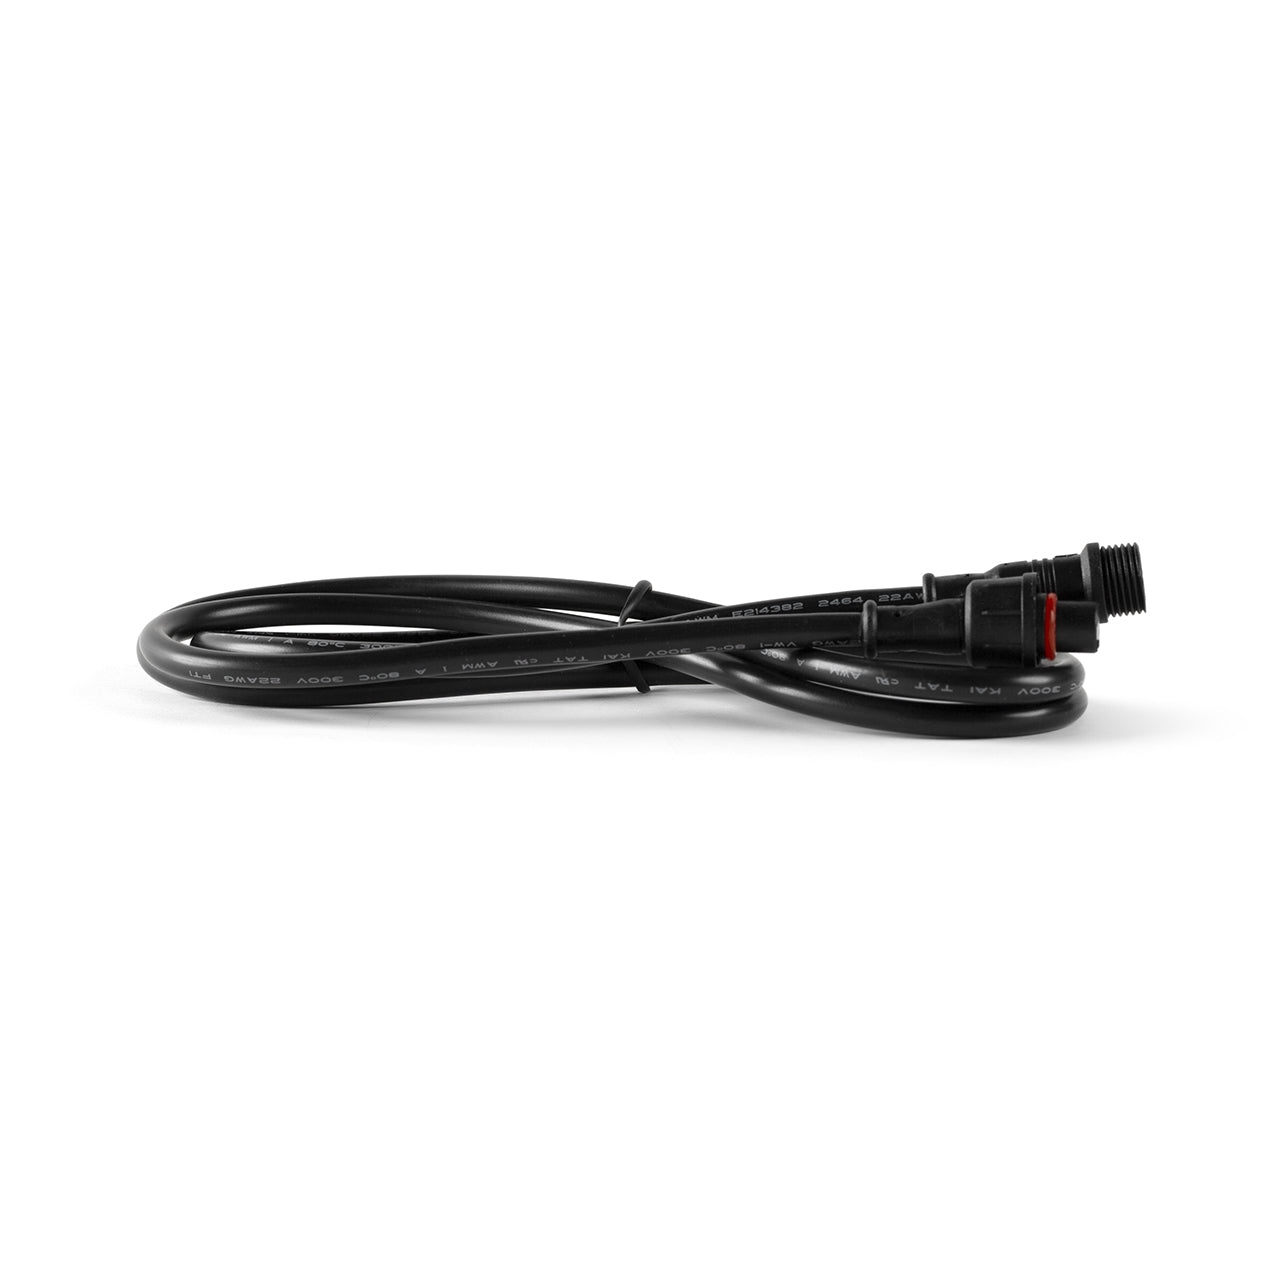 1m Cable Extension - RGB Rock Lights